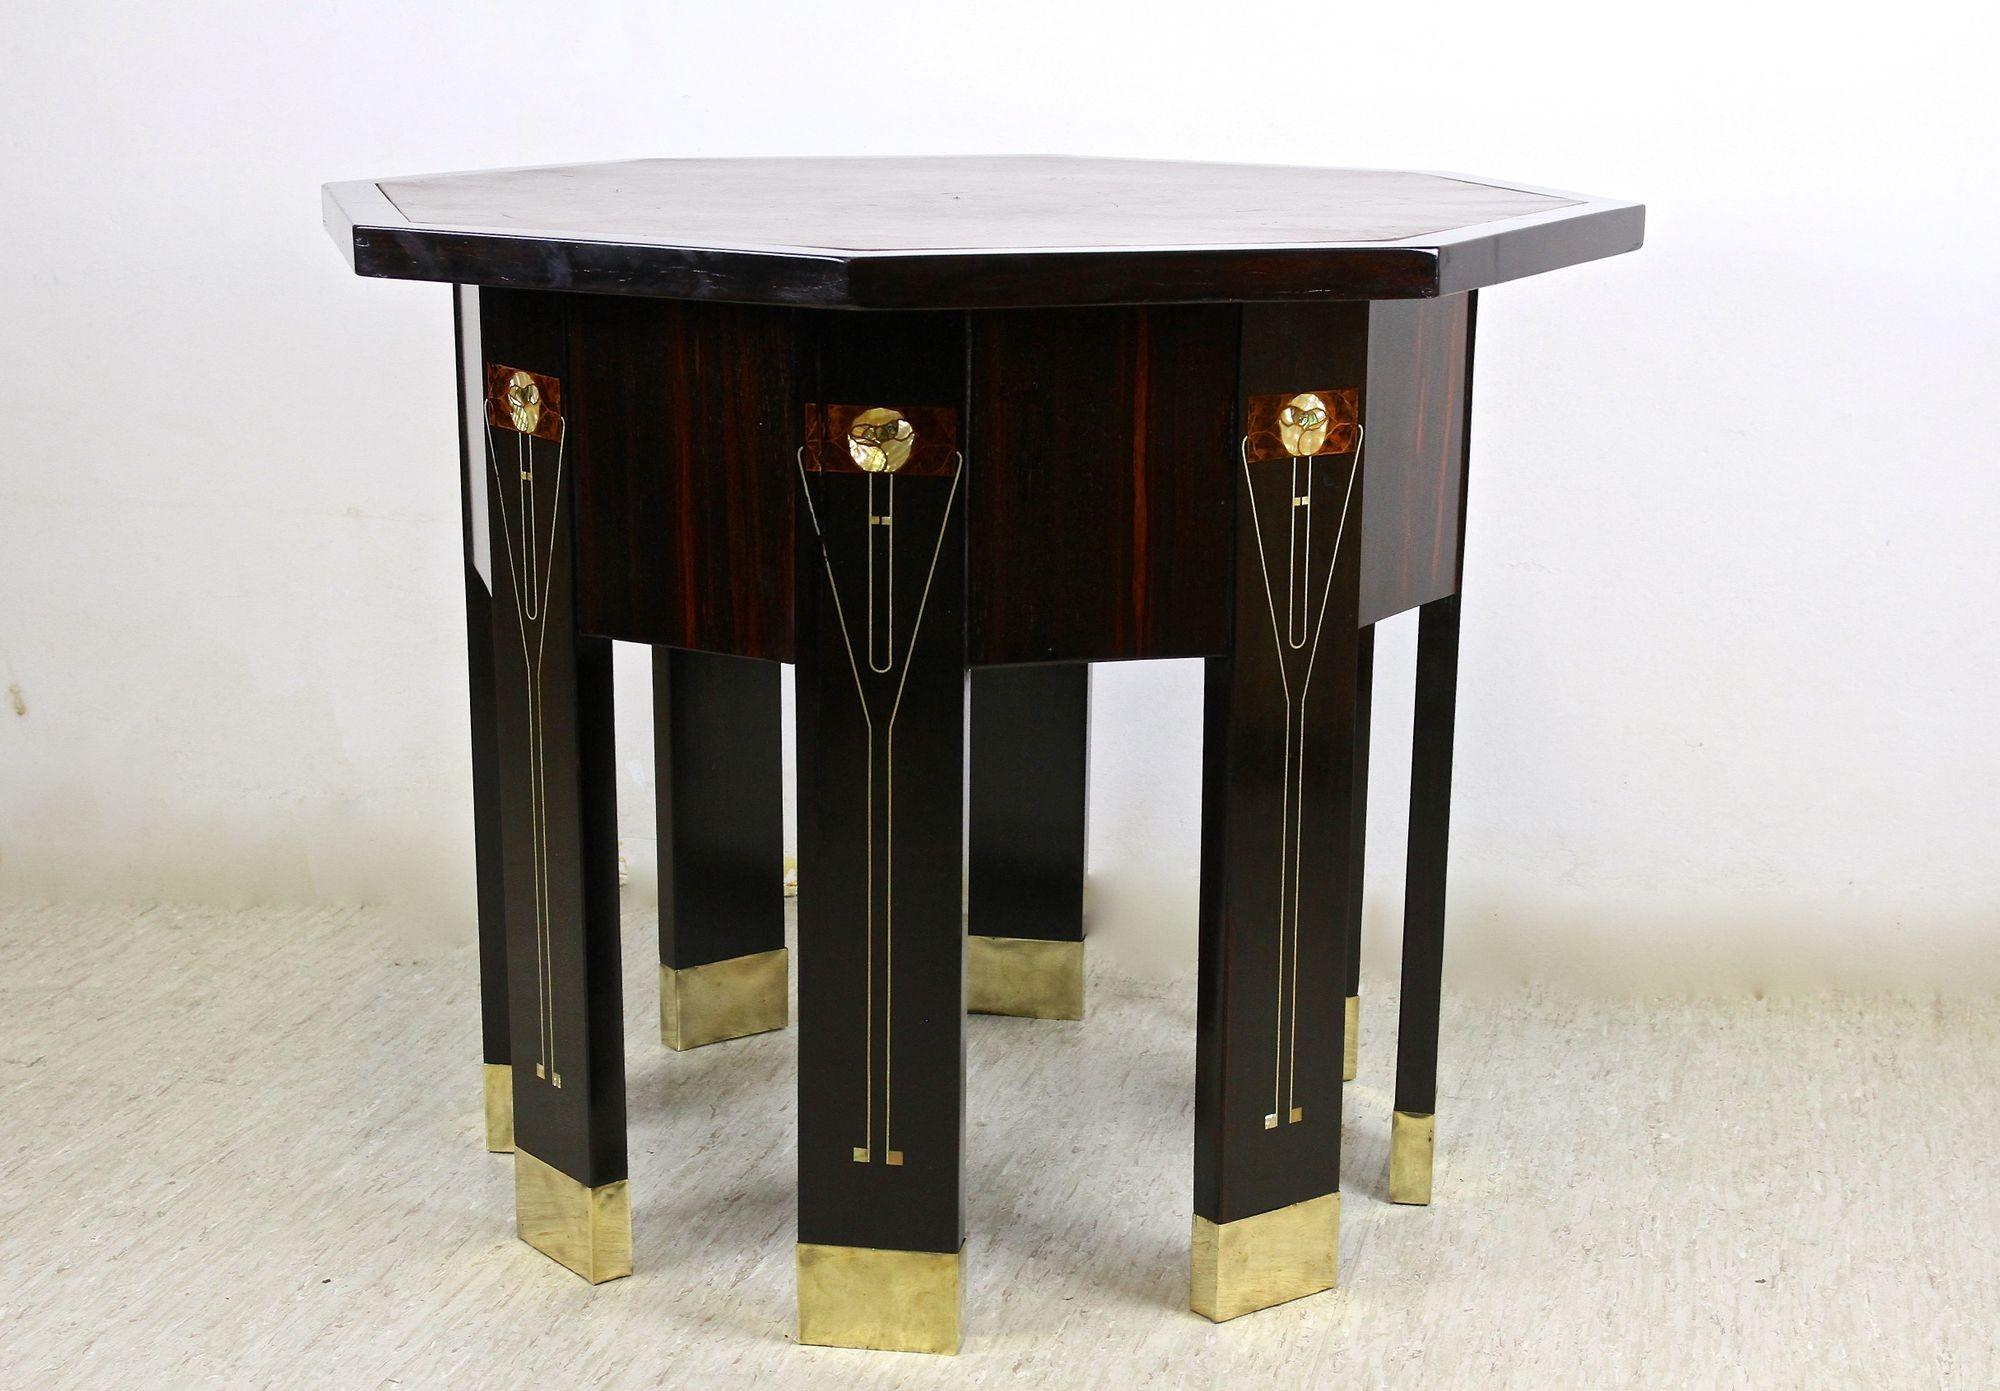 Art Nouveau Octagonal Palisander Table with Mother of Pearl Inlays, AT ca. 1905 For Sale 4